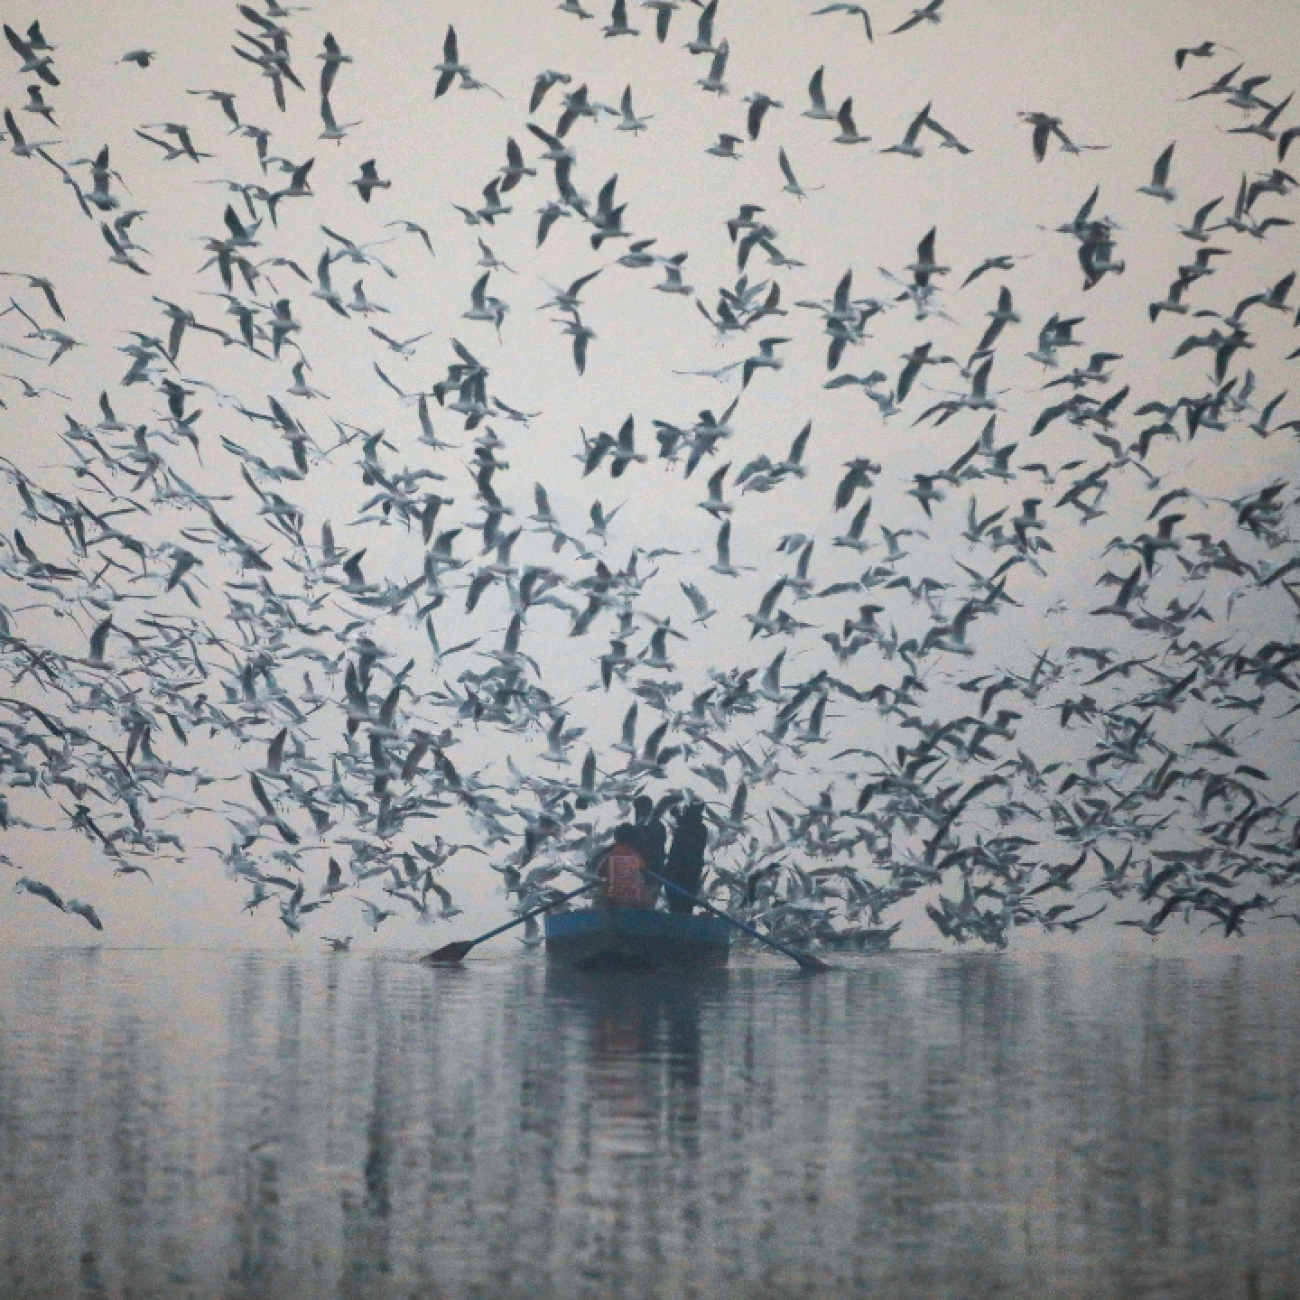 Dozens of seagulls swoop down to grab food from people in a small boat on the Yamuna River, on a smoggy morning in New Delhi, India, on November 18, 2021. 